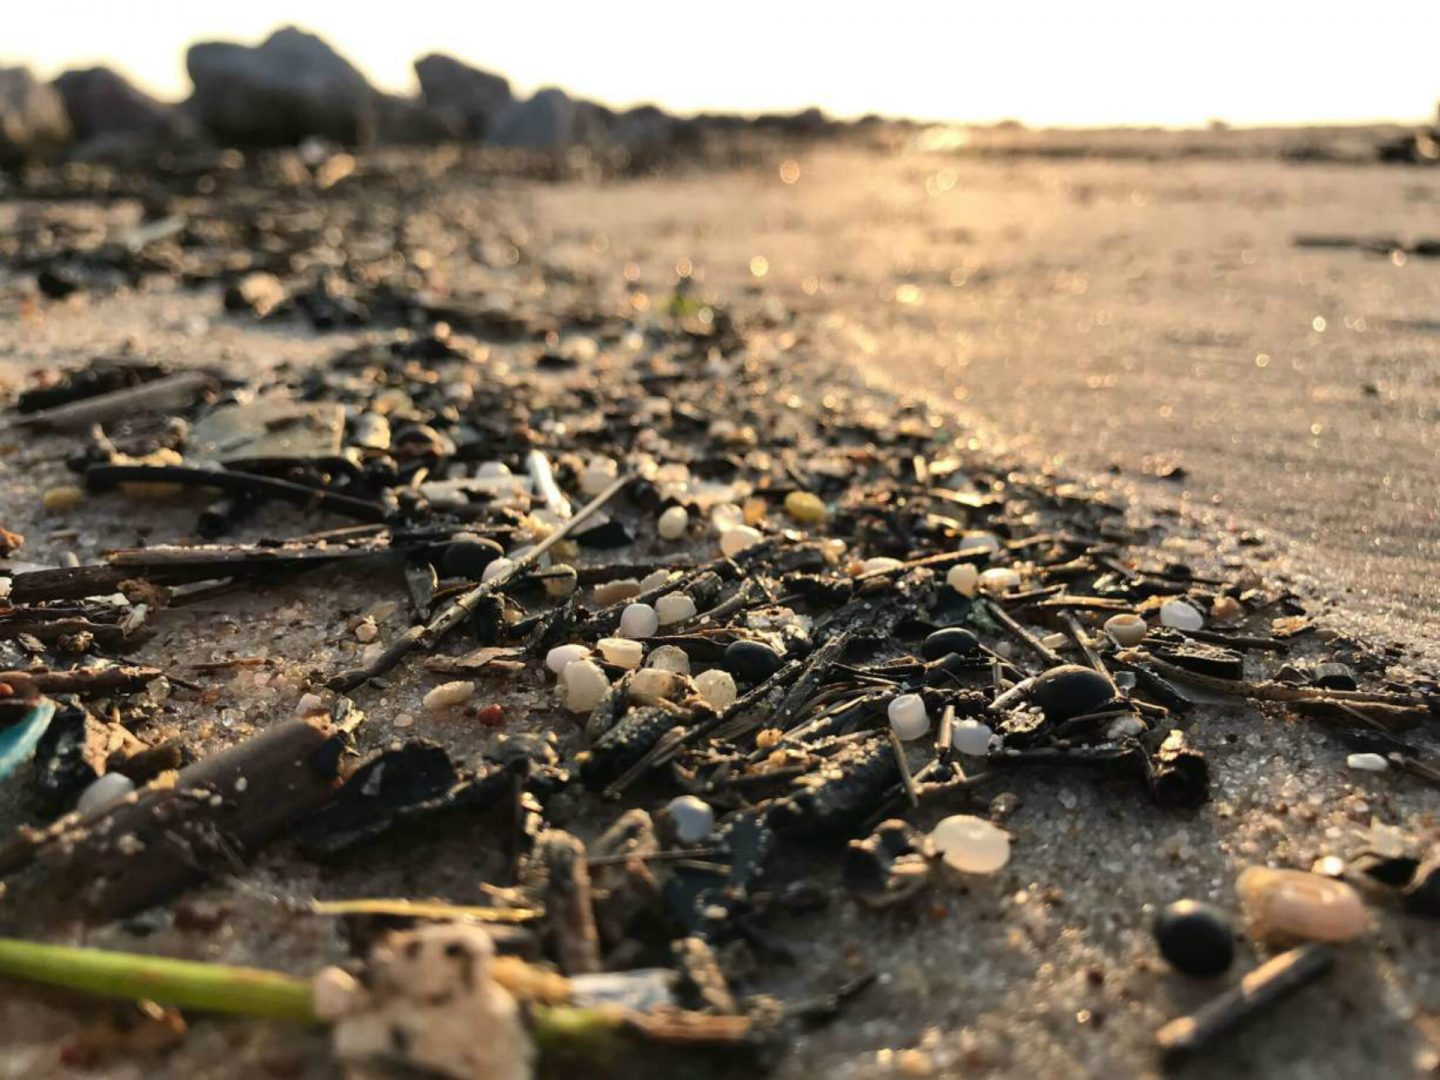 Nurdles along the shores of Galveston Bay in Texas, home to many petrochemical plants, which can inadvertently spill pellets. 